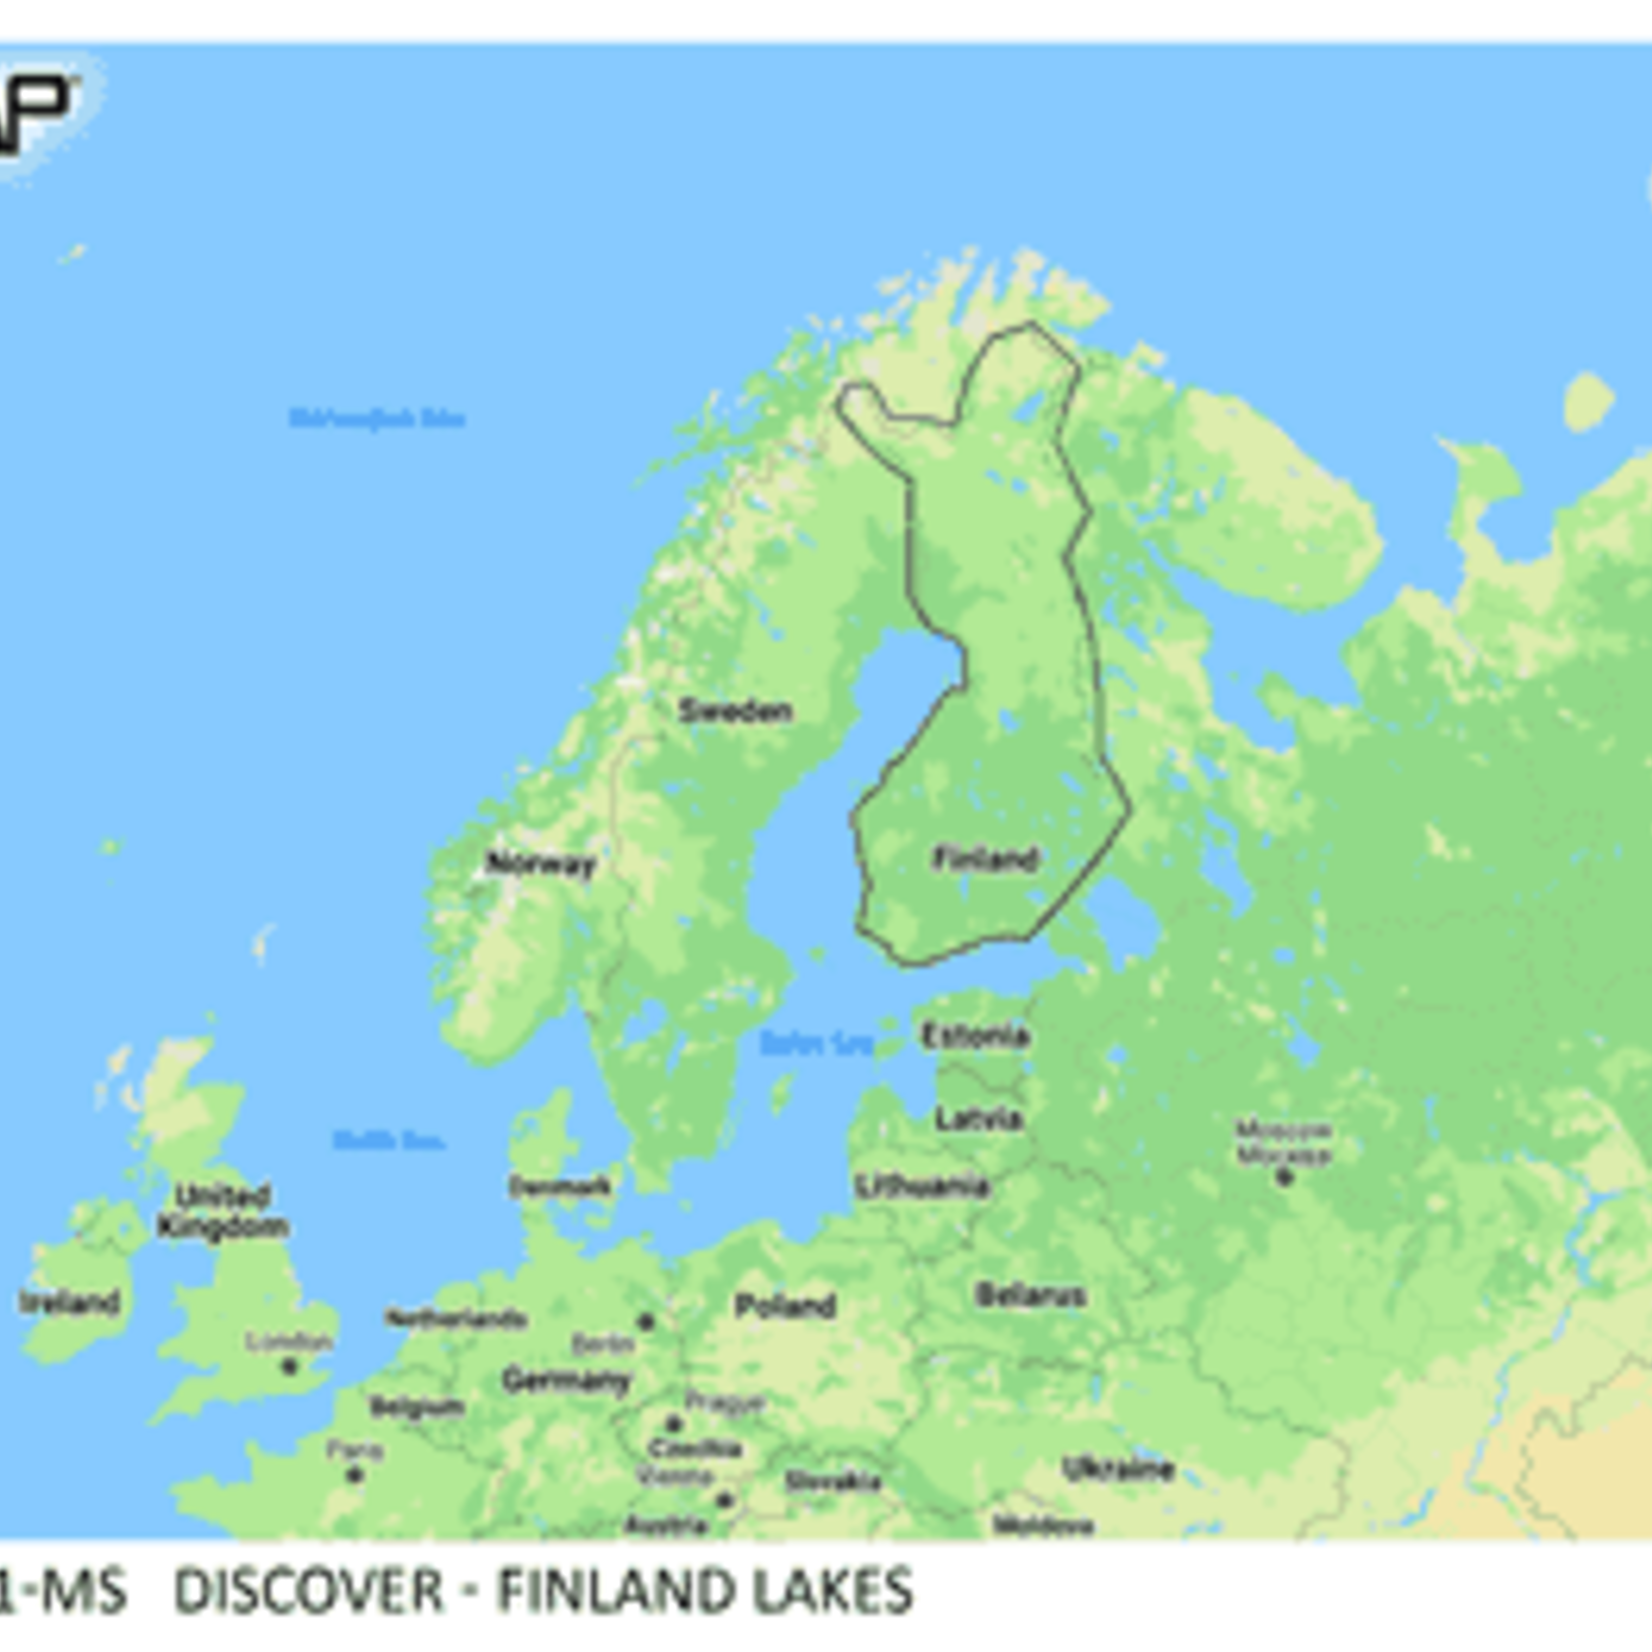 C-MAP DISCOVER - Finland Lakes